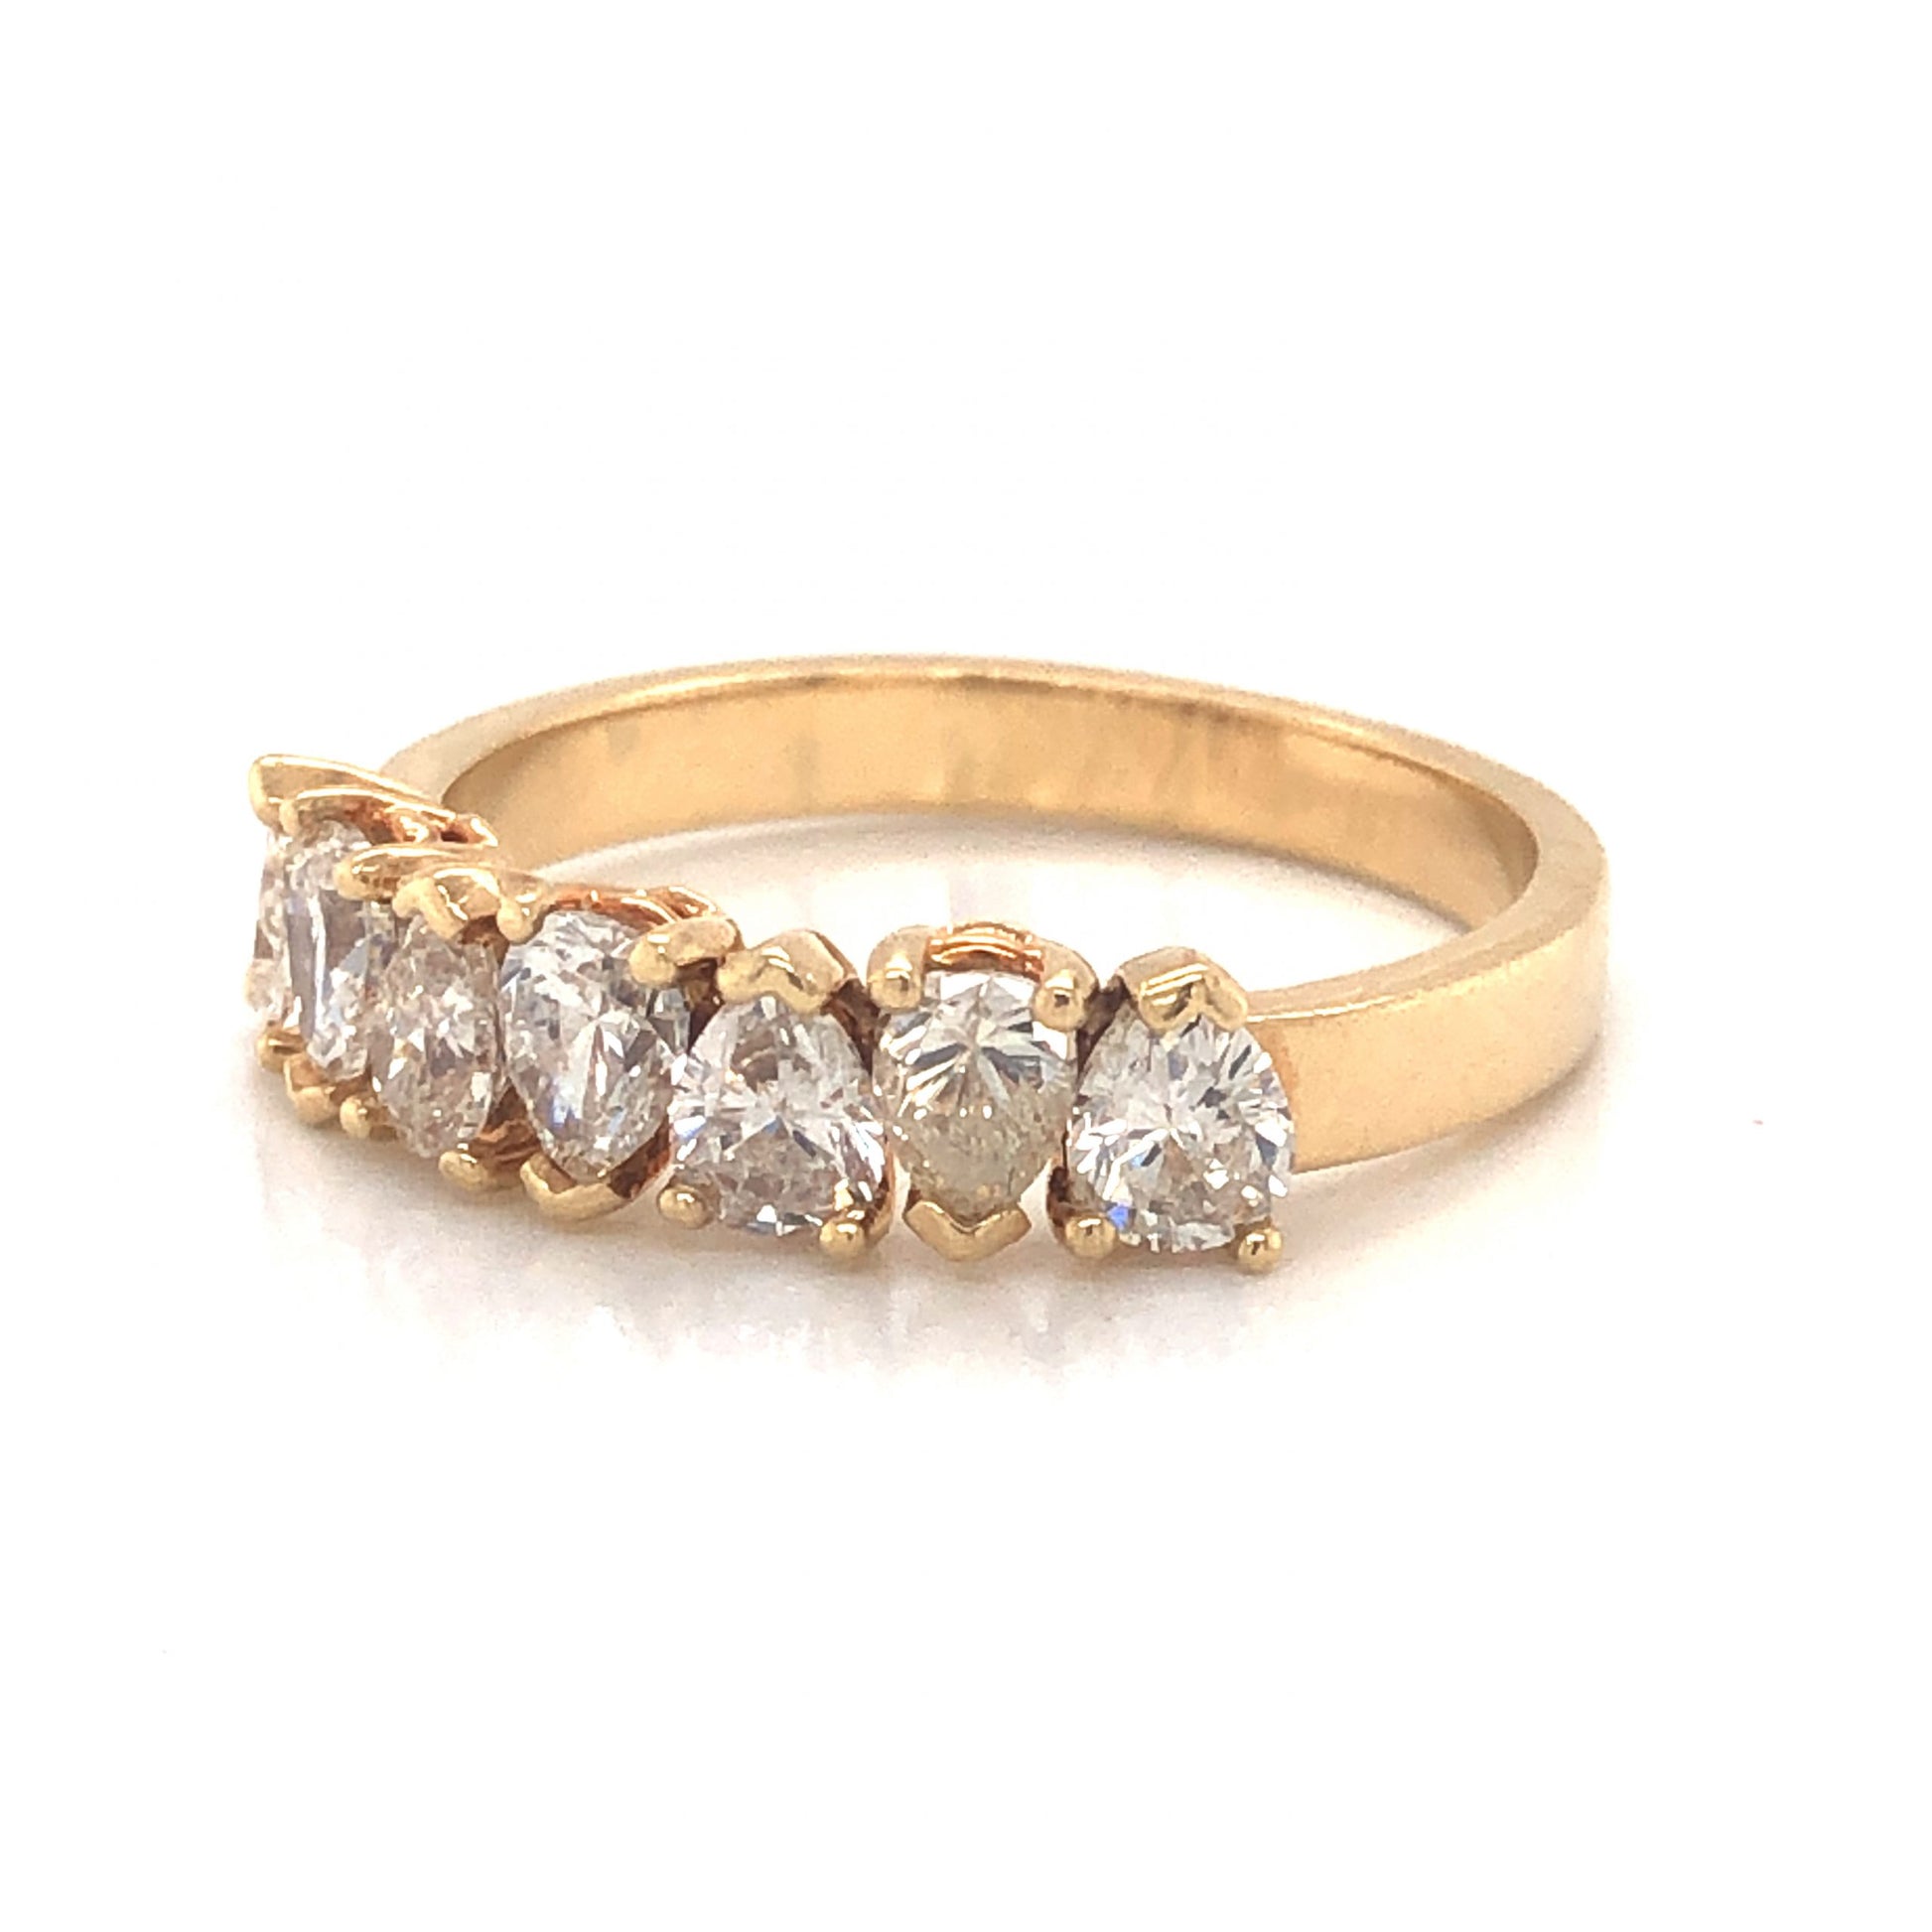 Pear Cut Diamond Wedding Band in 14k Yellow GoldComposition: 14 Karat Yellow Gold Ring Size: 7 Total Diamond Weight: 1.05ct Total Gram Weight: 3.4 g Inscription: 14k
      